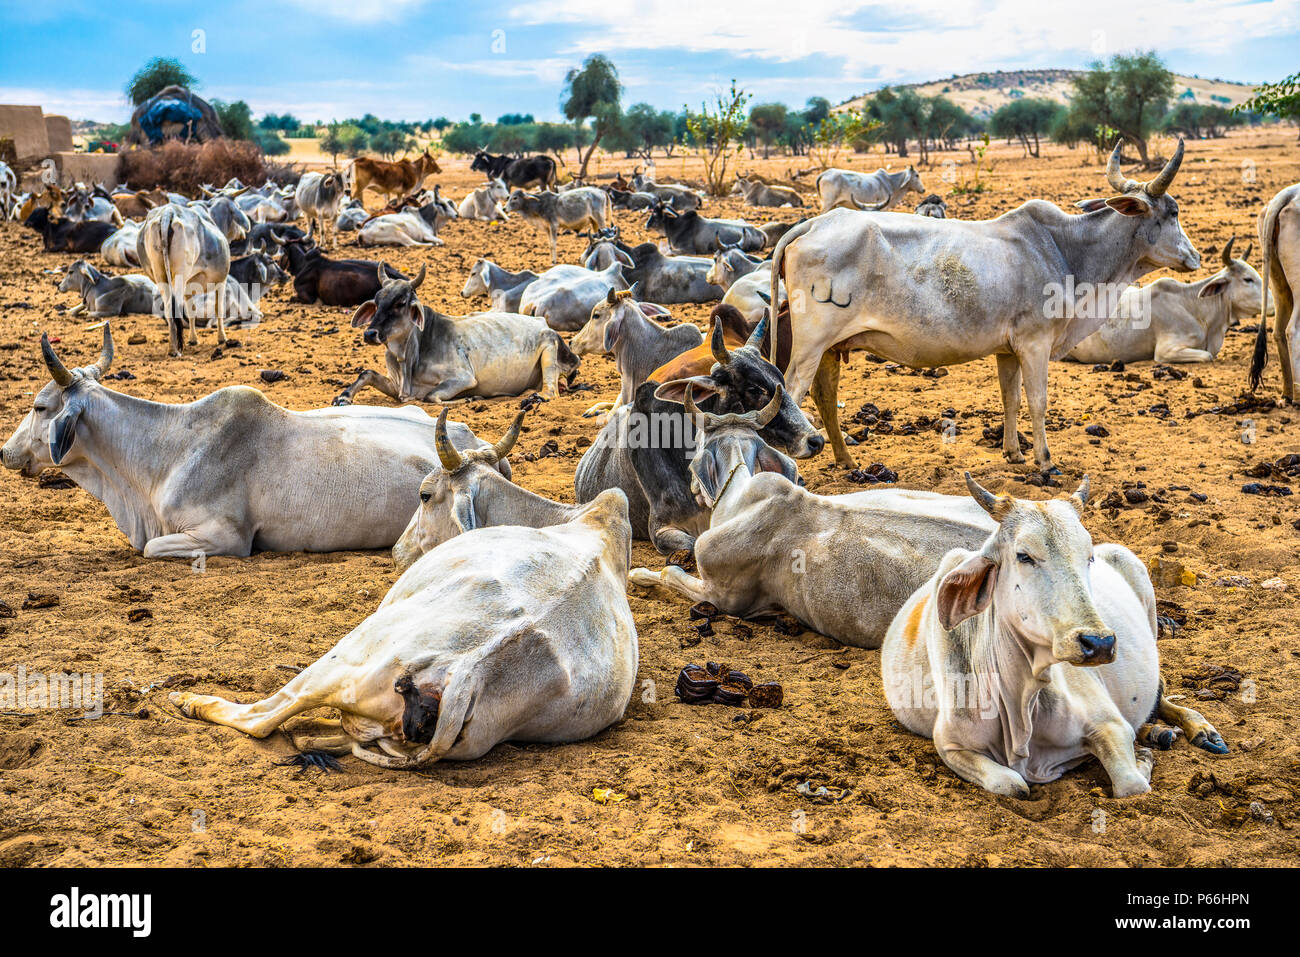 INDIA RAJASTHAN Cows in Thar desert Stock Photo